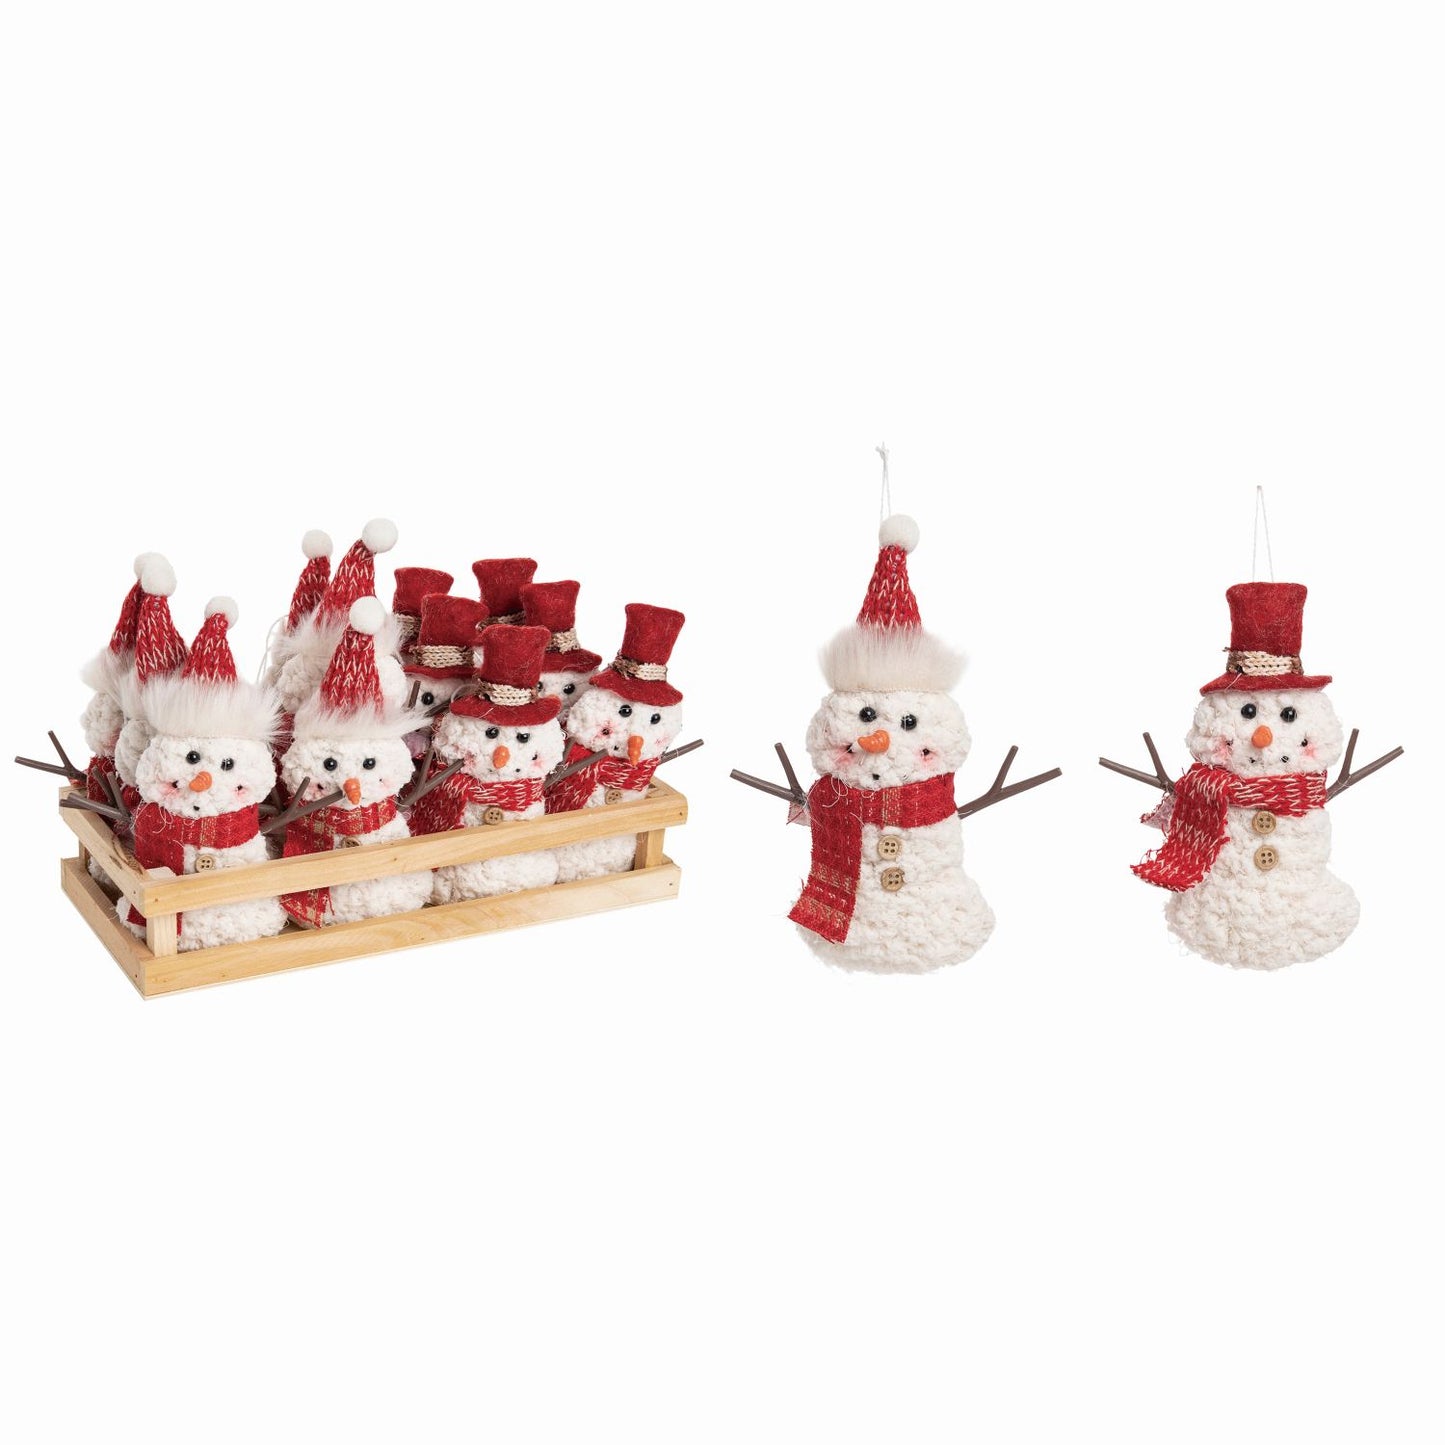 Transpac Plush Red/White Snowman Ornament In Wood Display, Set Of 12